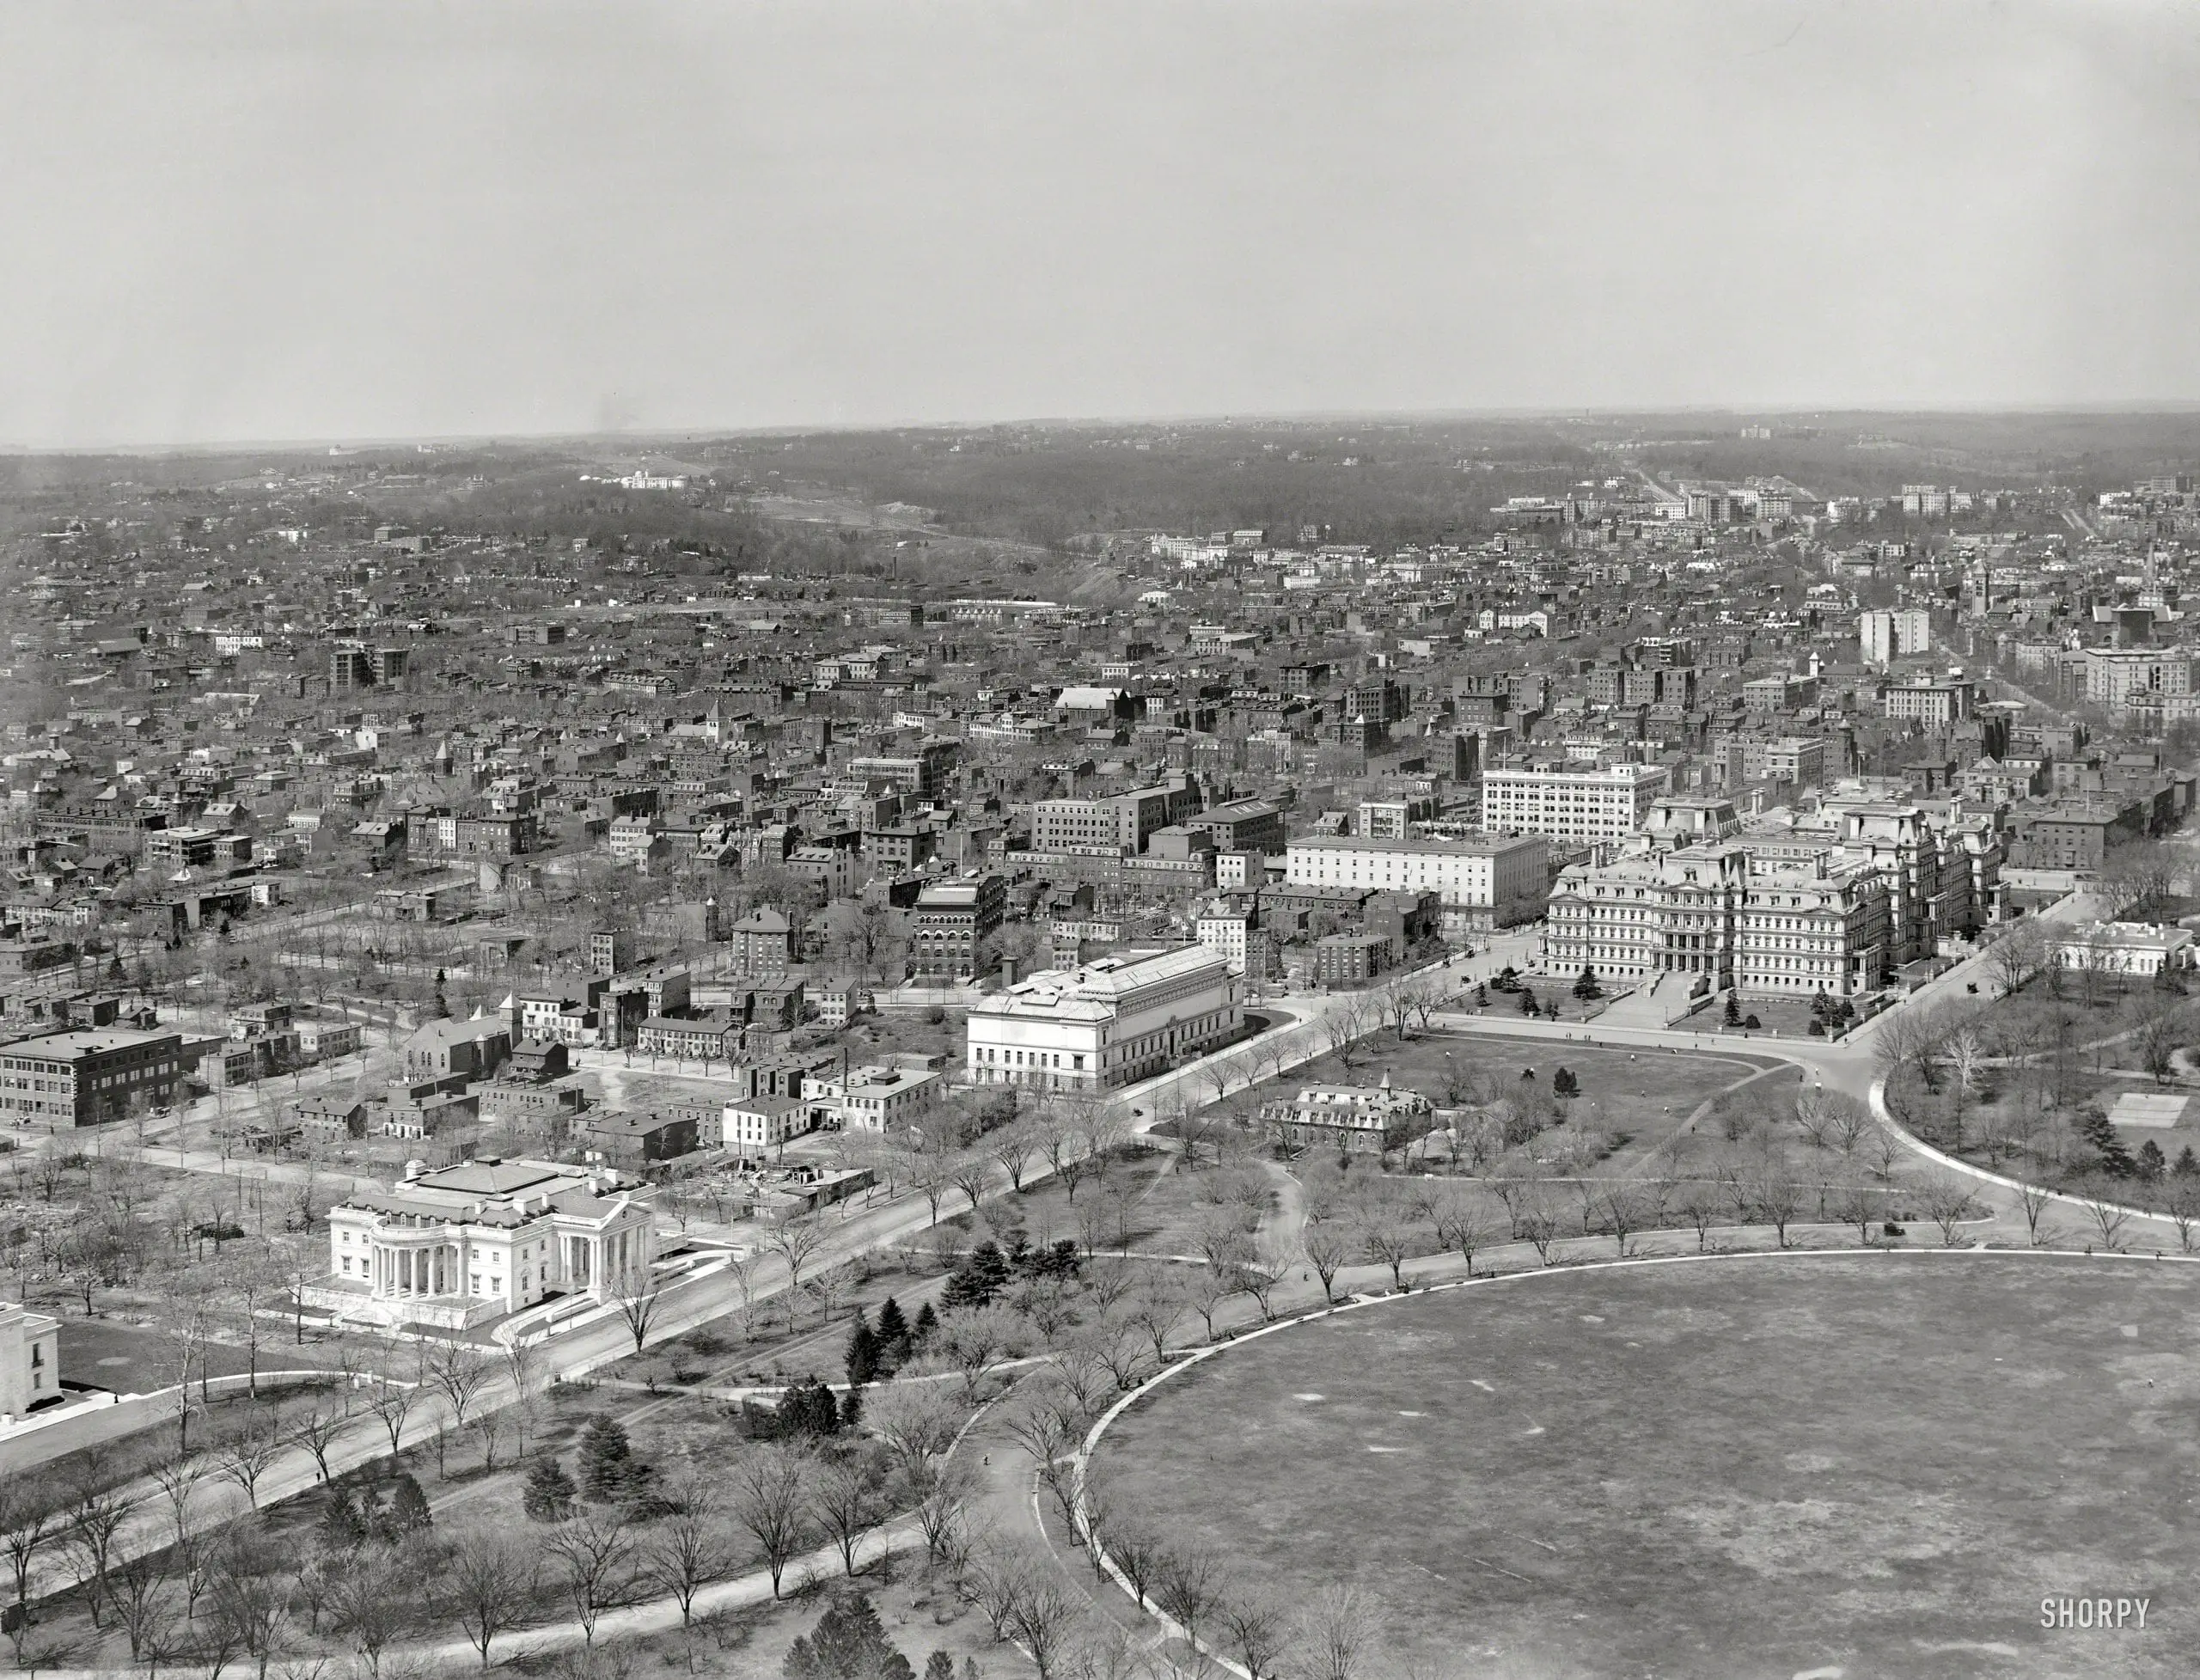 Circa 1911, landmarks include, from left, Memorial Continental Hall (headquarters of the Daughters of the American Revolution); the Corcoran Gallery of Art; State, War and Navy Building; and White House West Wingtip. 8x10 inch glass negative, Detroit Publishing Company.